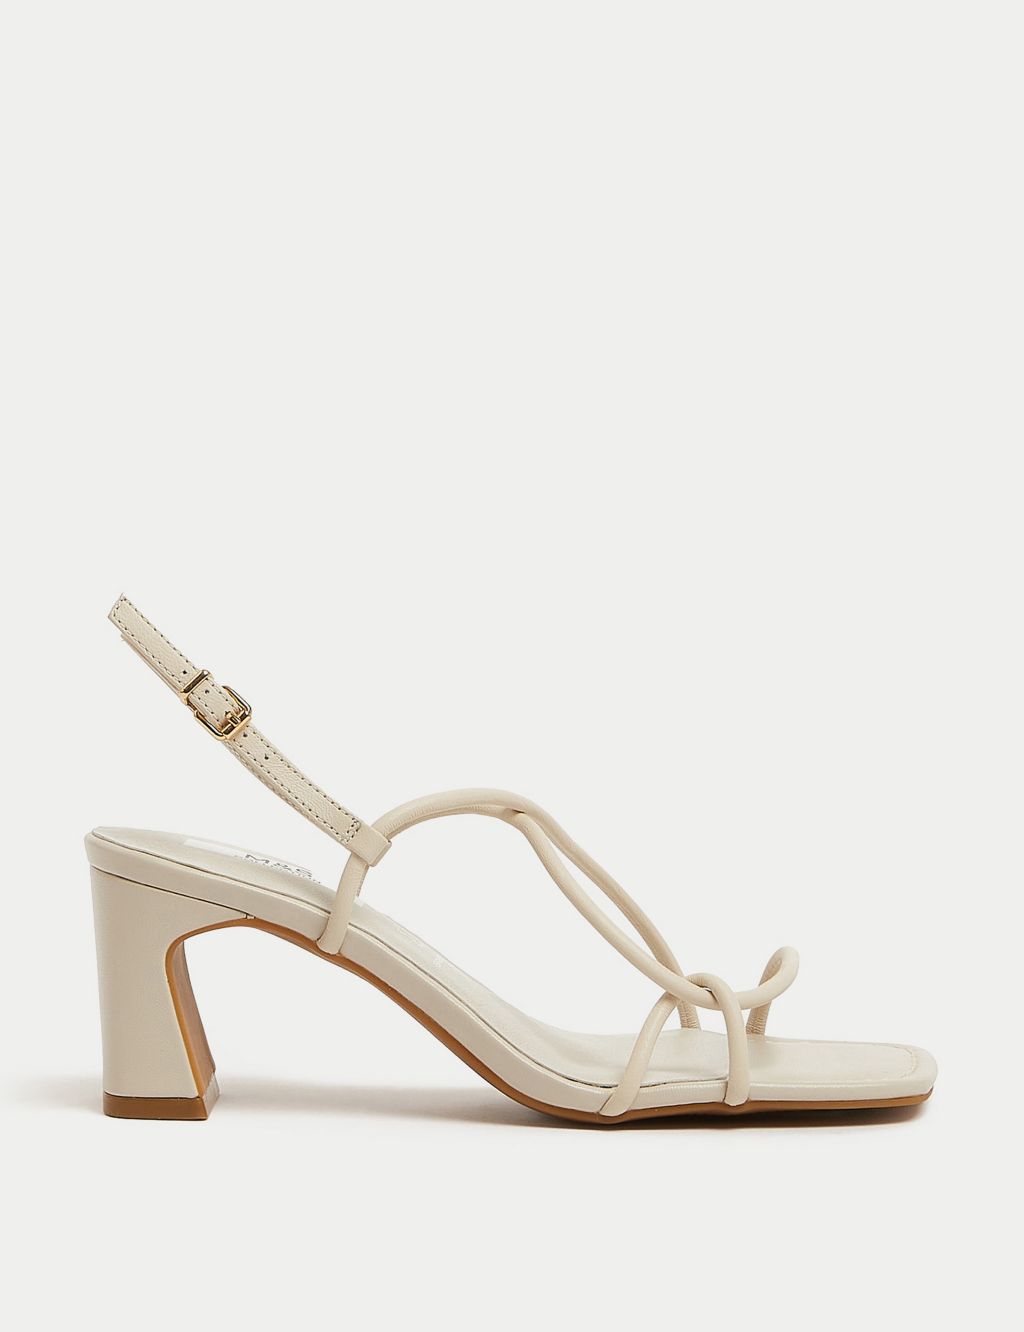 Leather Strappy Statement Sandals Mid image 1